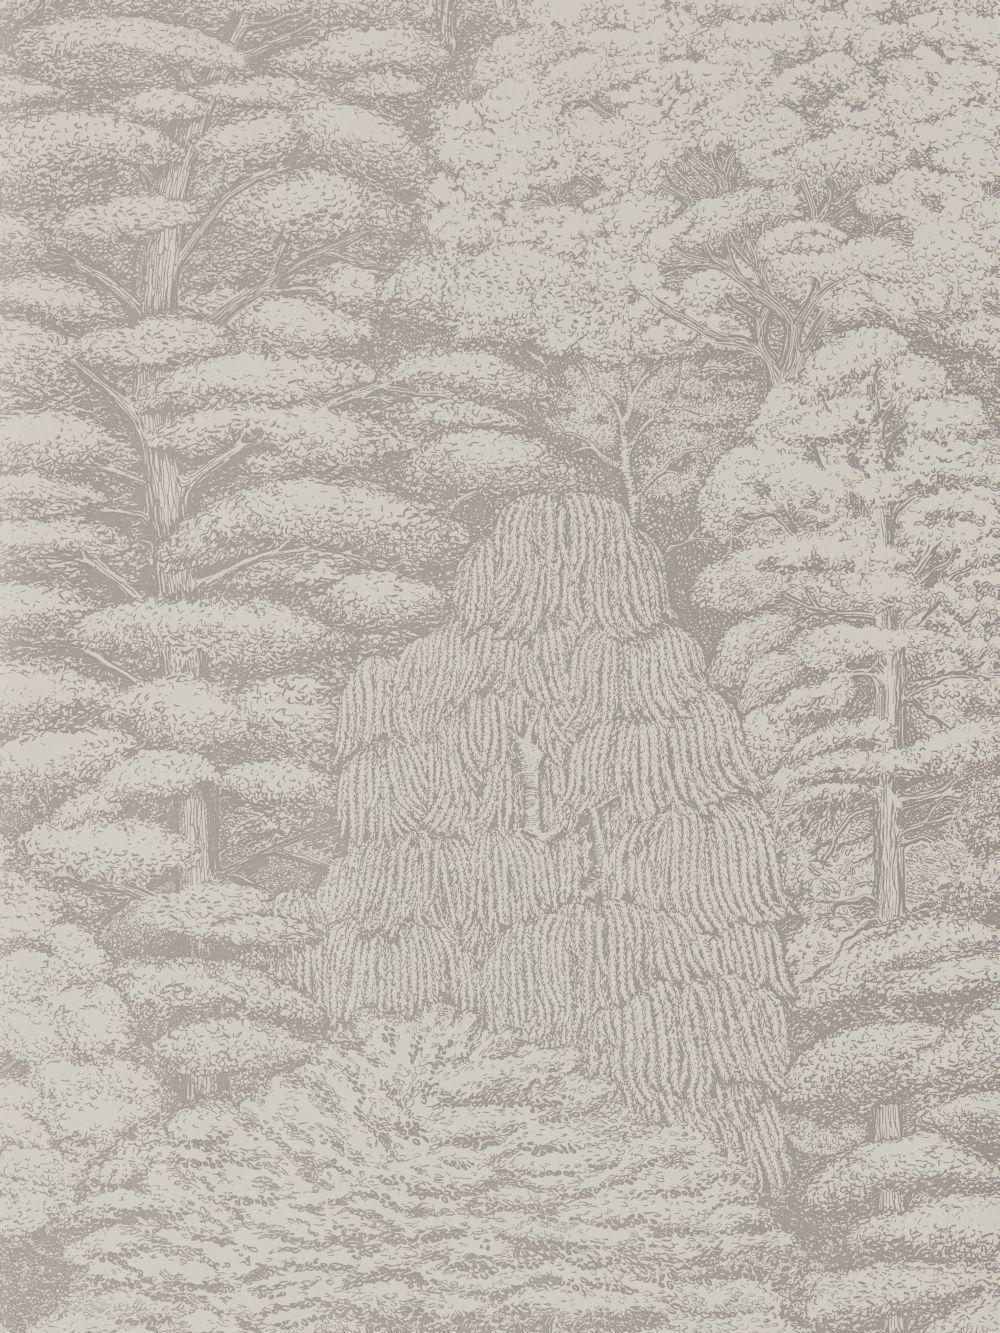 Woodland Toile, Wallpaper, 215718. Toile, Linens and Wallpaper